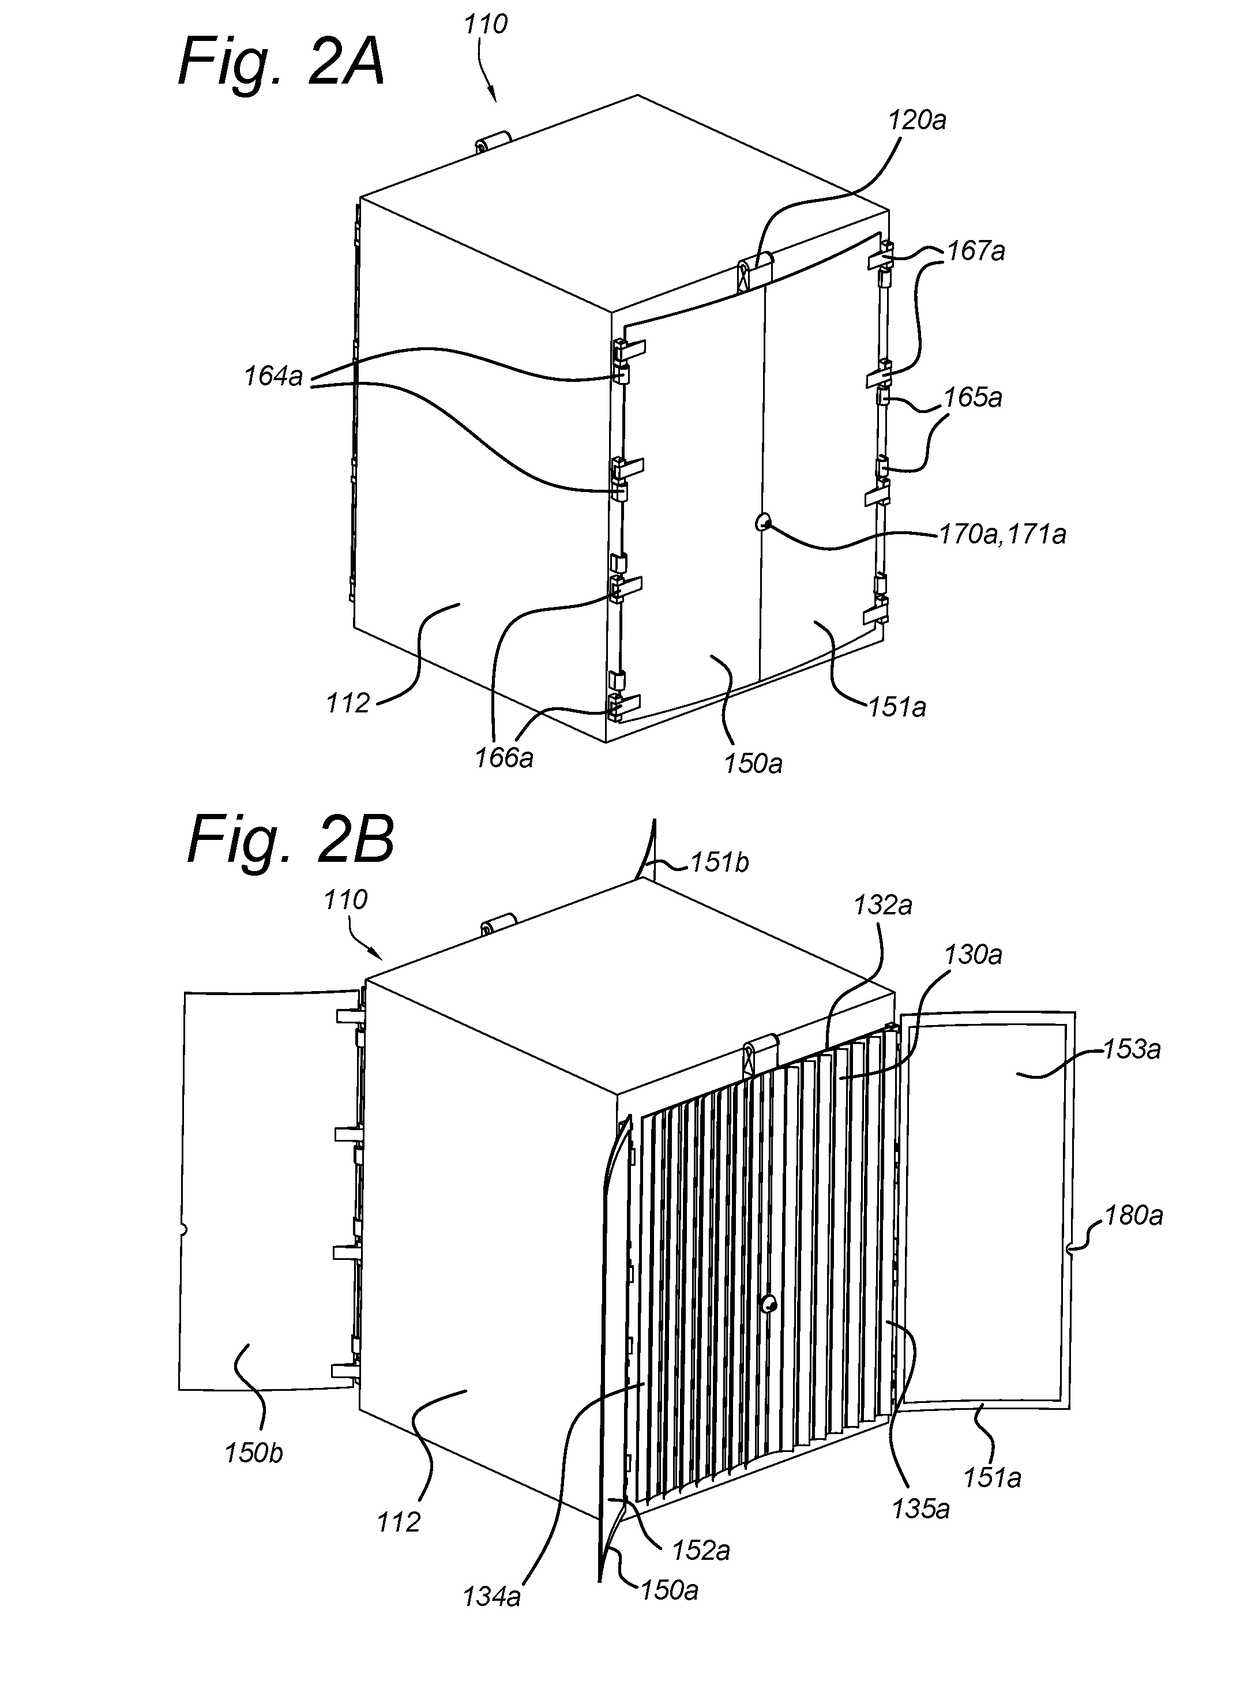 Solar Panel and Flexible Radiator for a Spacecraft